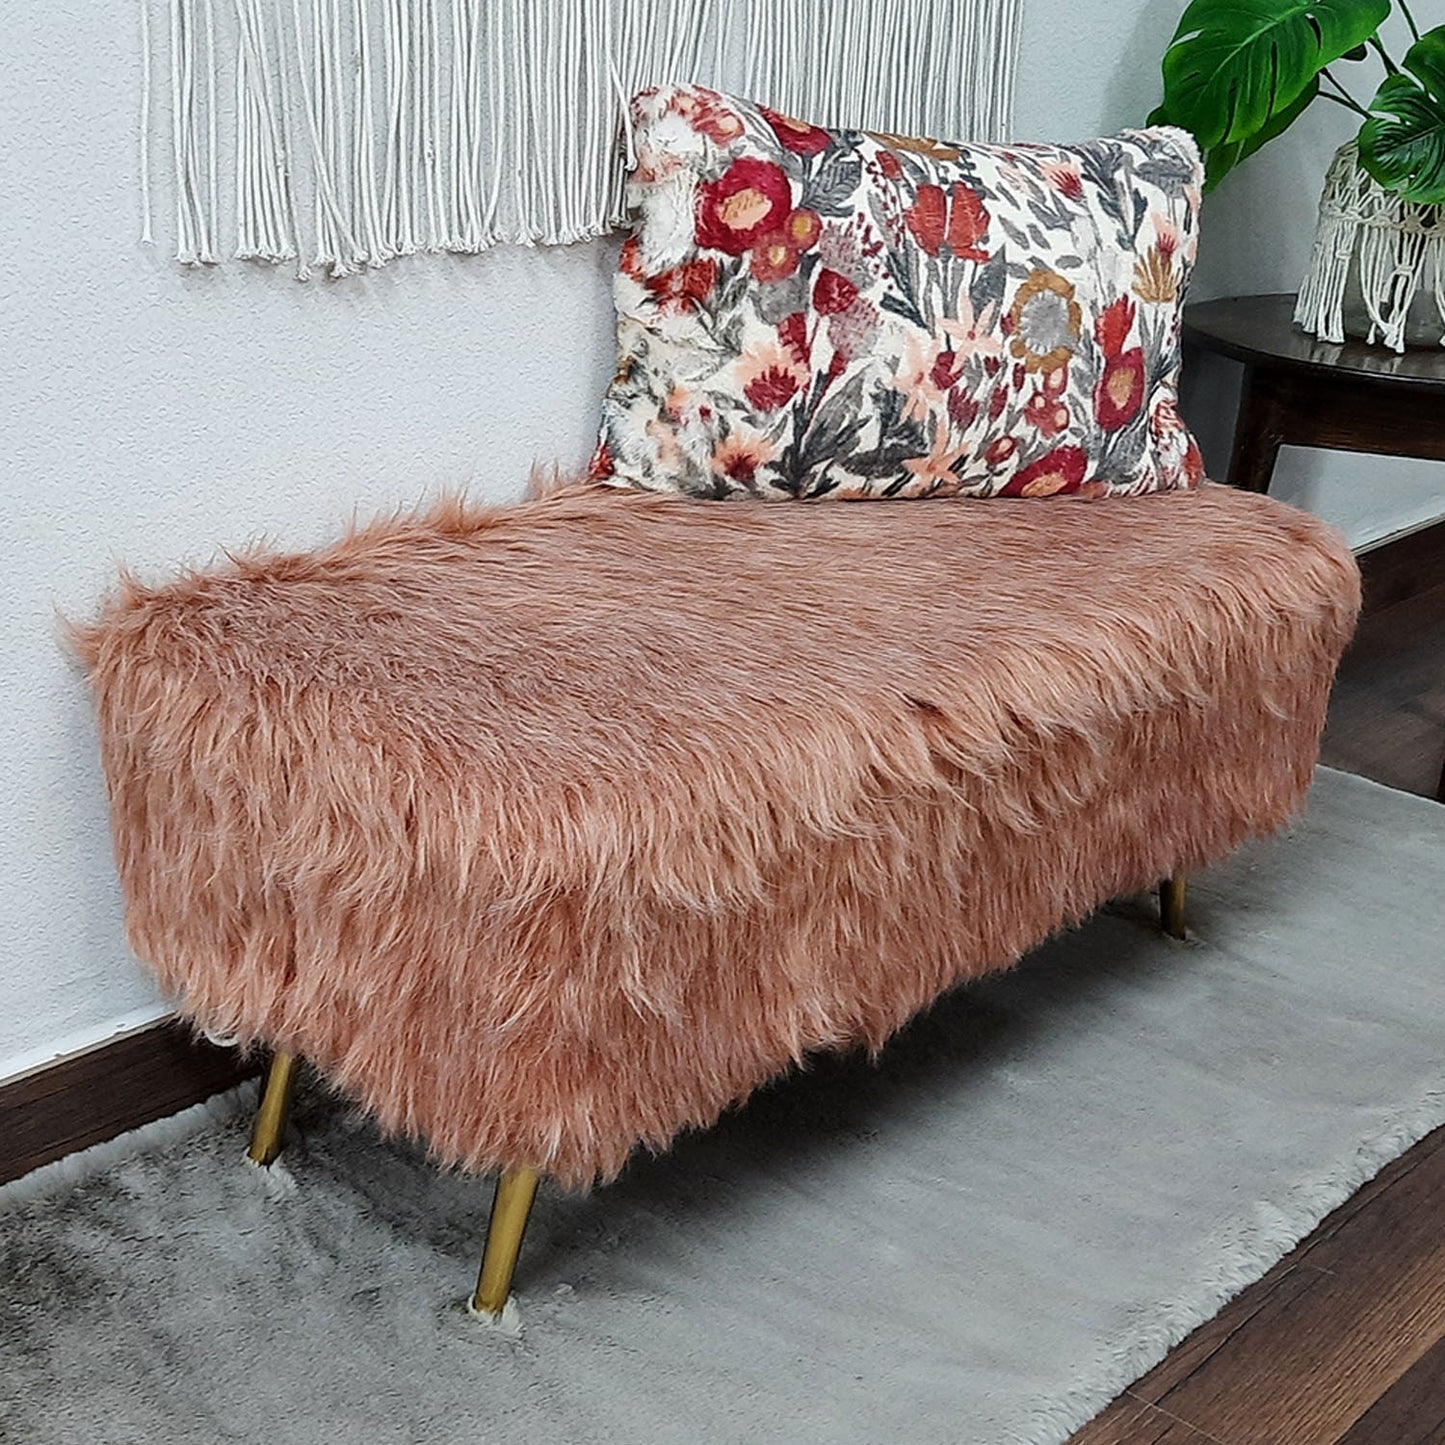 Noviato Collection – Light Redwood Premium Double Shade Long Faux Fur Bench Gold Metal Legs Modern On-Trend Style Multi-Functional Ottoman Bench Seat, 90 cm length | from Avioni